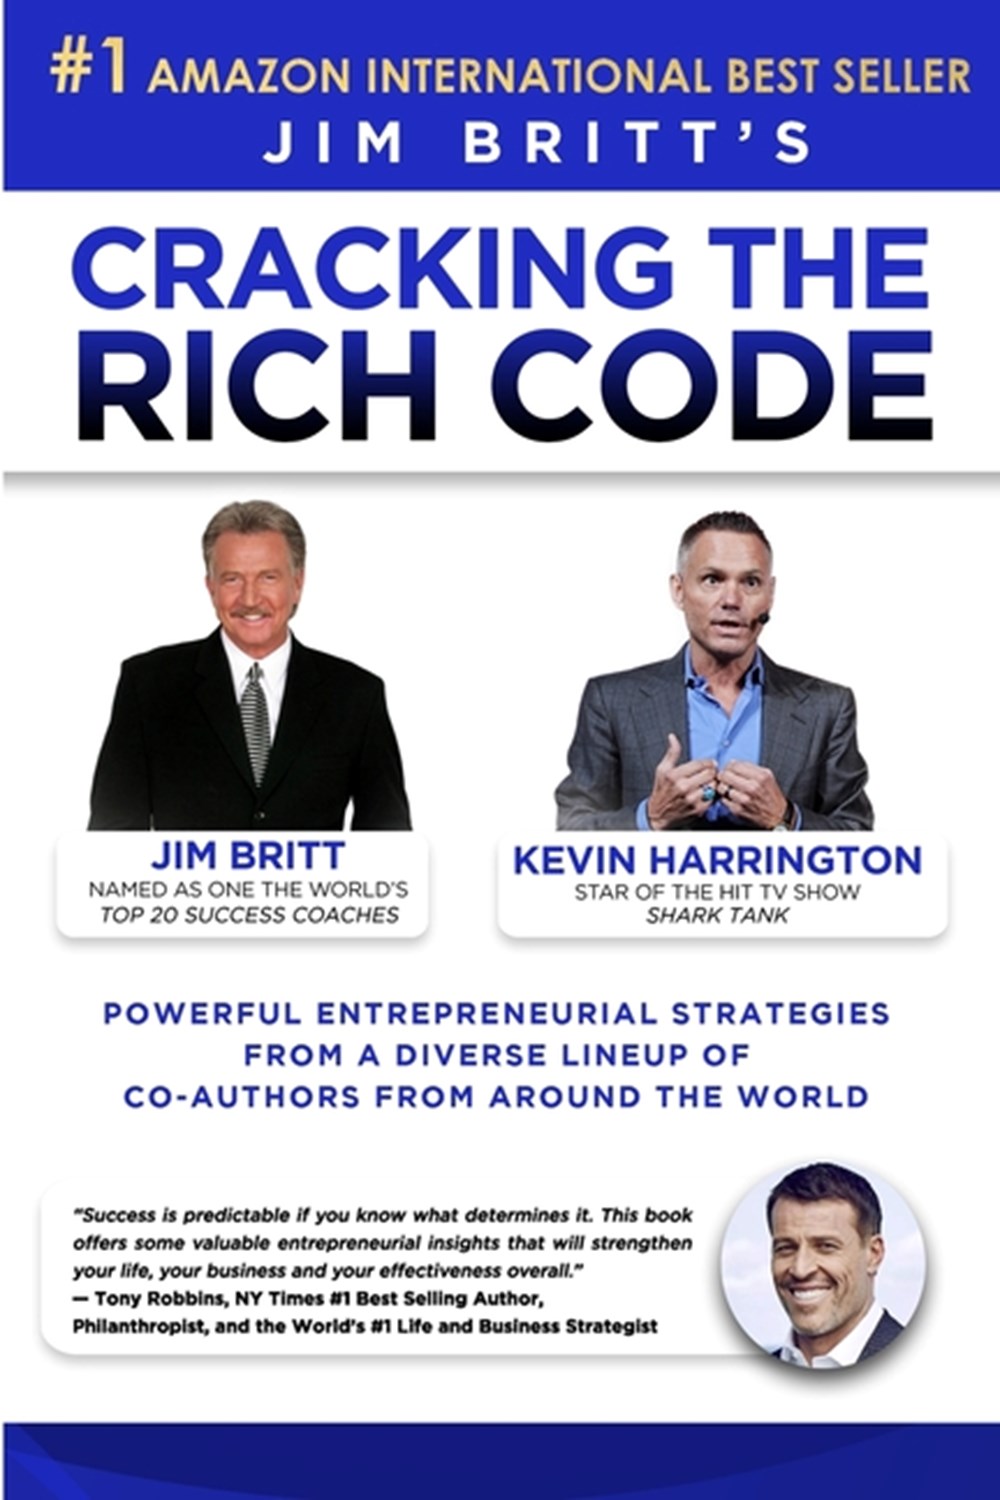 Cracking the Rich Code Vol 3: Powerful entrepreneurial strategies and insights from a diverse lineup